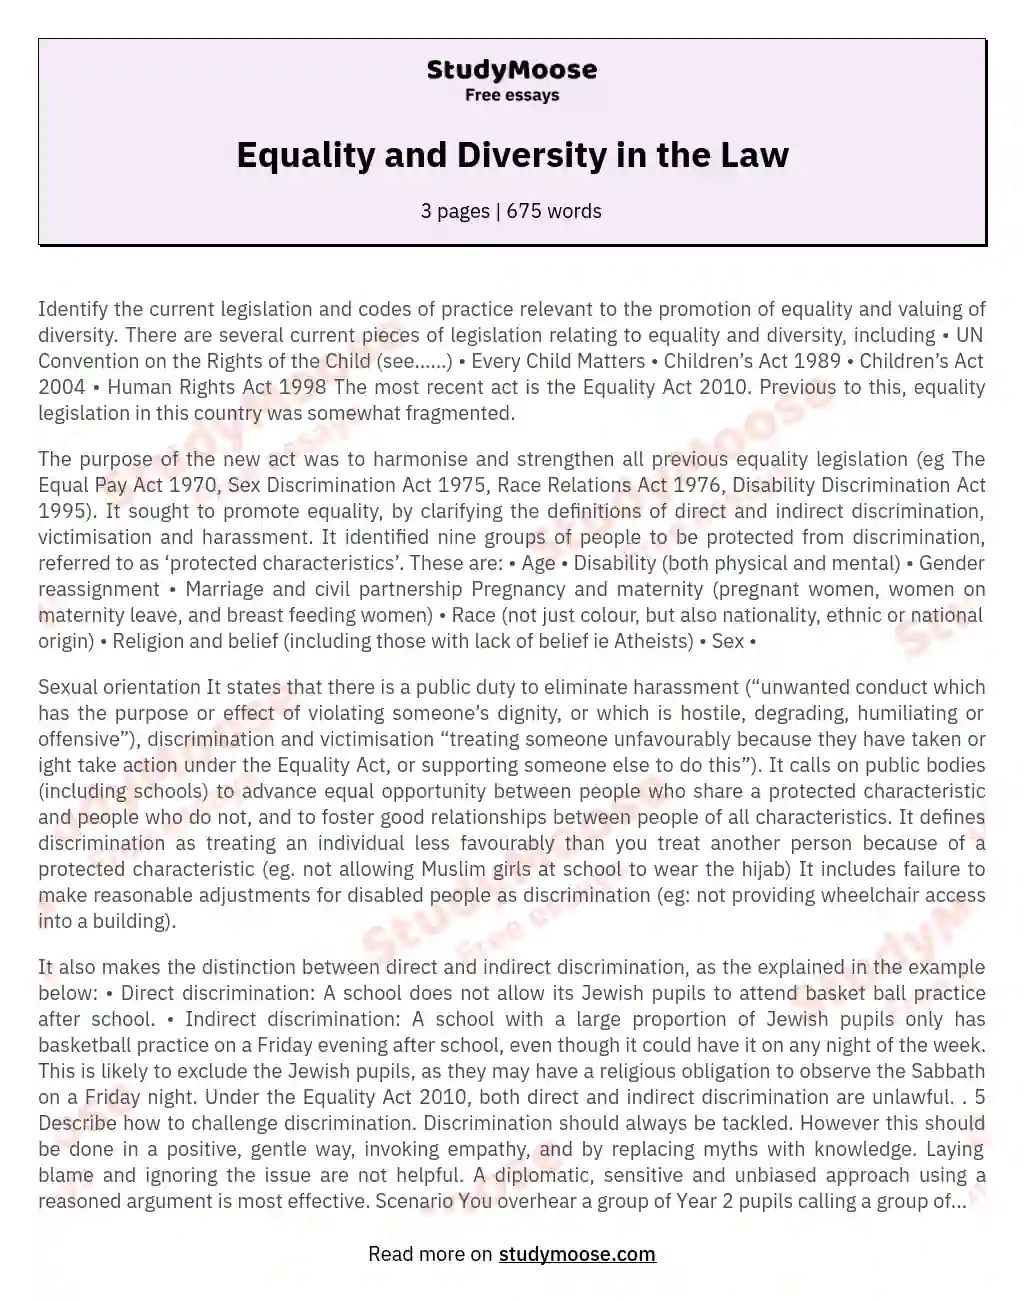 Equality and Diversity in the Law essay